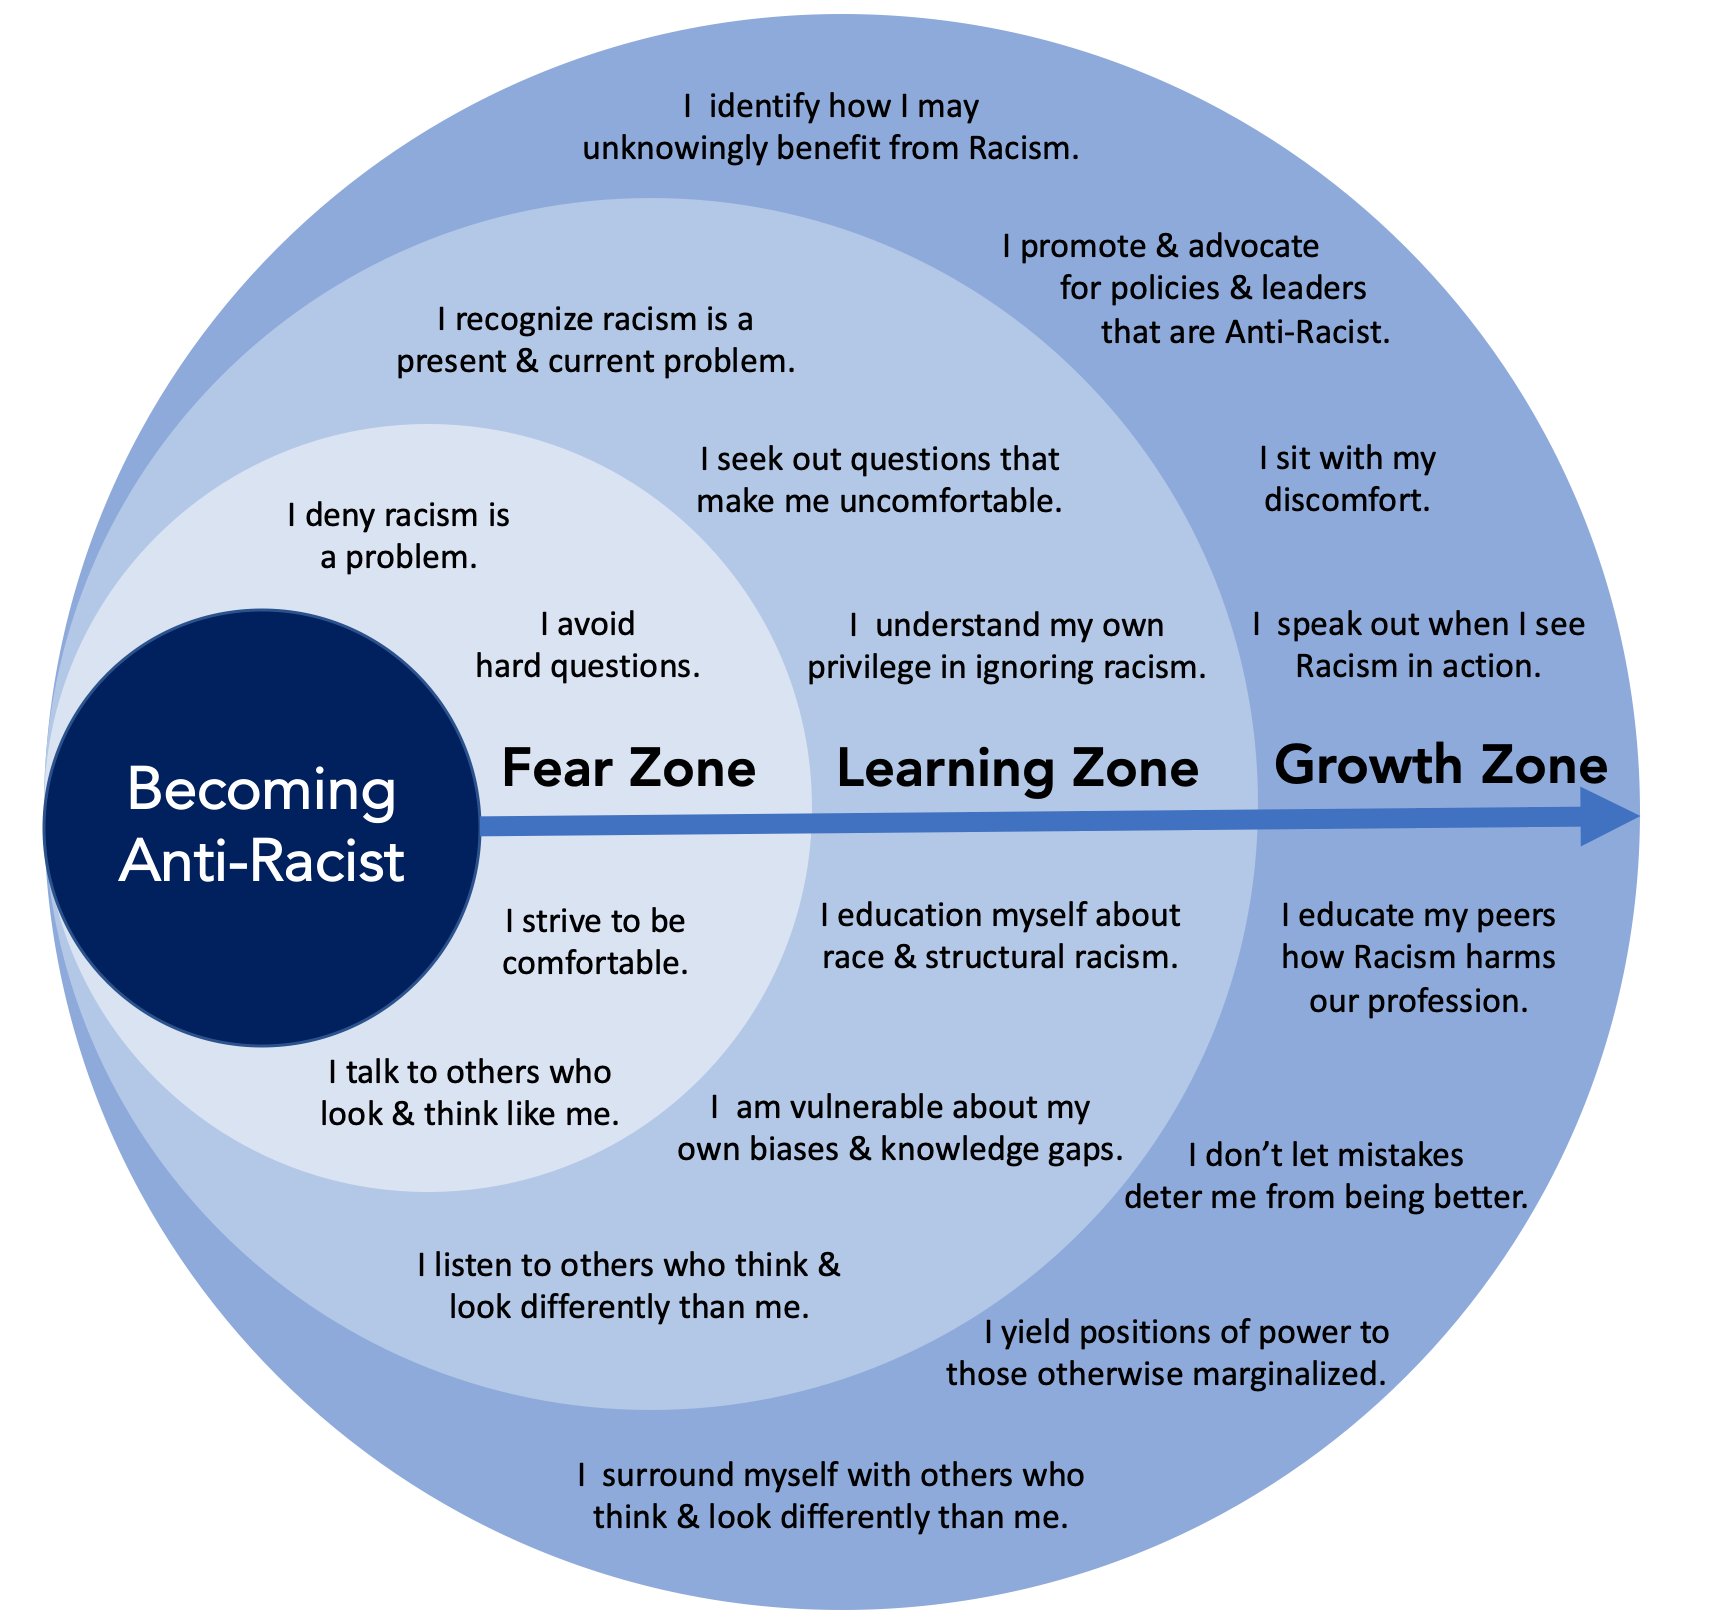 This image has four concentric circles, with the centre one labelled: Becoming anti-racist. Moving out from the centre are the fear zone, the learning zone, and the growth zone. Each of these concentric zone has a number of I statements. The fear zone includes: (a) I deny racism is a problem; (b) I avoid hard questions; (c) I strive to be comfortable; and (d) I talk to others who look and think like me. The learning zone includes the following: (a) I recognize racism is a present and current problem; (b) I see out questions that make me uncomfortable; (c) I understand my own priviledge in ignoring racism, (d) I education myself about race and structural racism, (e) I am vulnerable about my own biases and knowledge gaps, and (f) I listen to othes who think and look differently than me. Finally the growth zone is characterized by the following: (a) I identify how I may unknowingly benefit from racism; (b) I promote and advocate for policies and leaders that are anti-racist; (c) I sit with my discomfort, (d) I speak out when I see racism in action; (d) I educate my peers how racism harms our profession; (f) I don't let mistakes deter me from being better; (g) I yield positions of power to those otherwise marginalized; and (h) I surround myself with others who think and look differently than me.